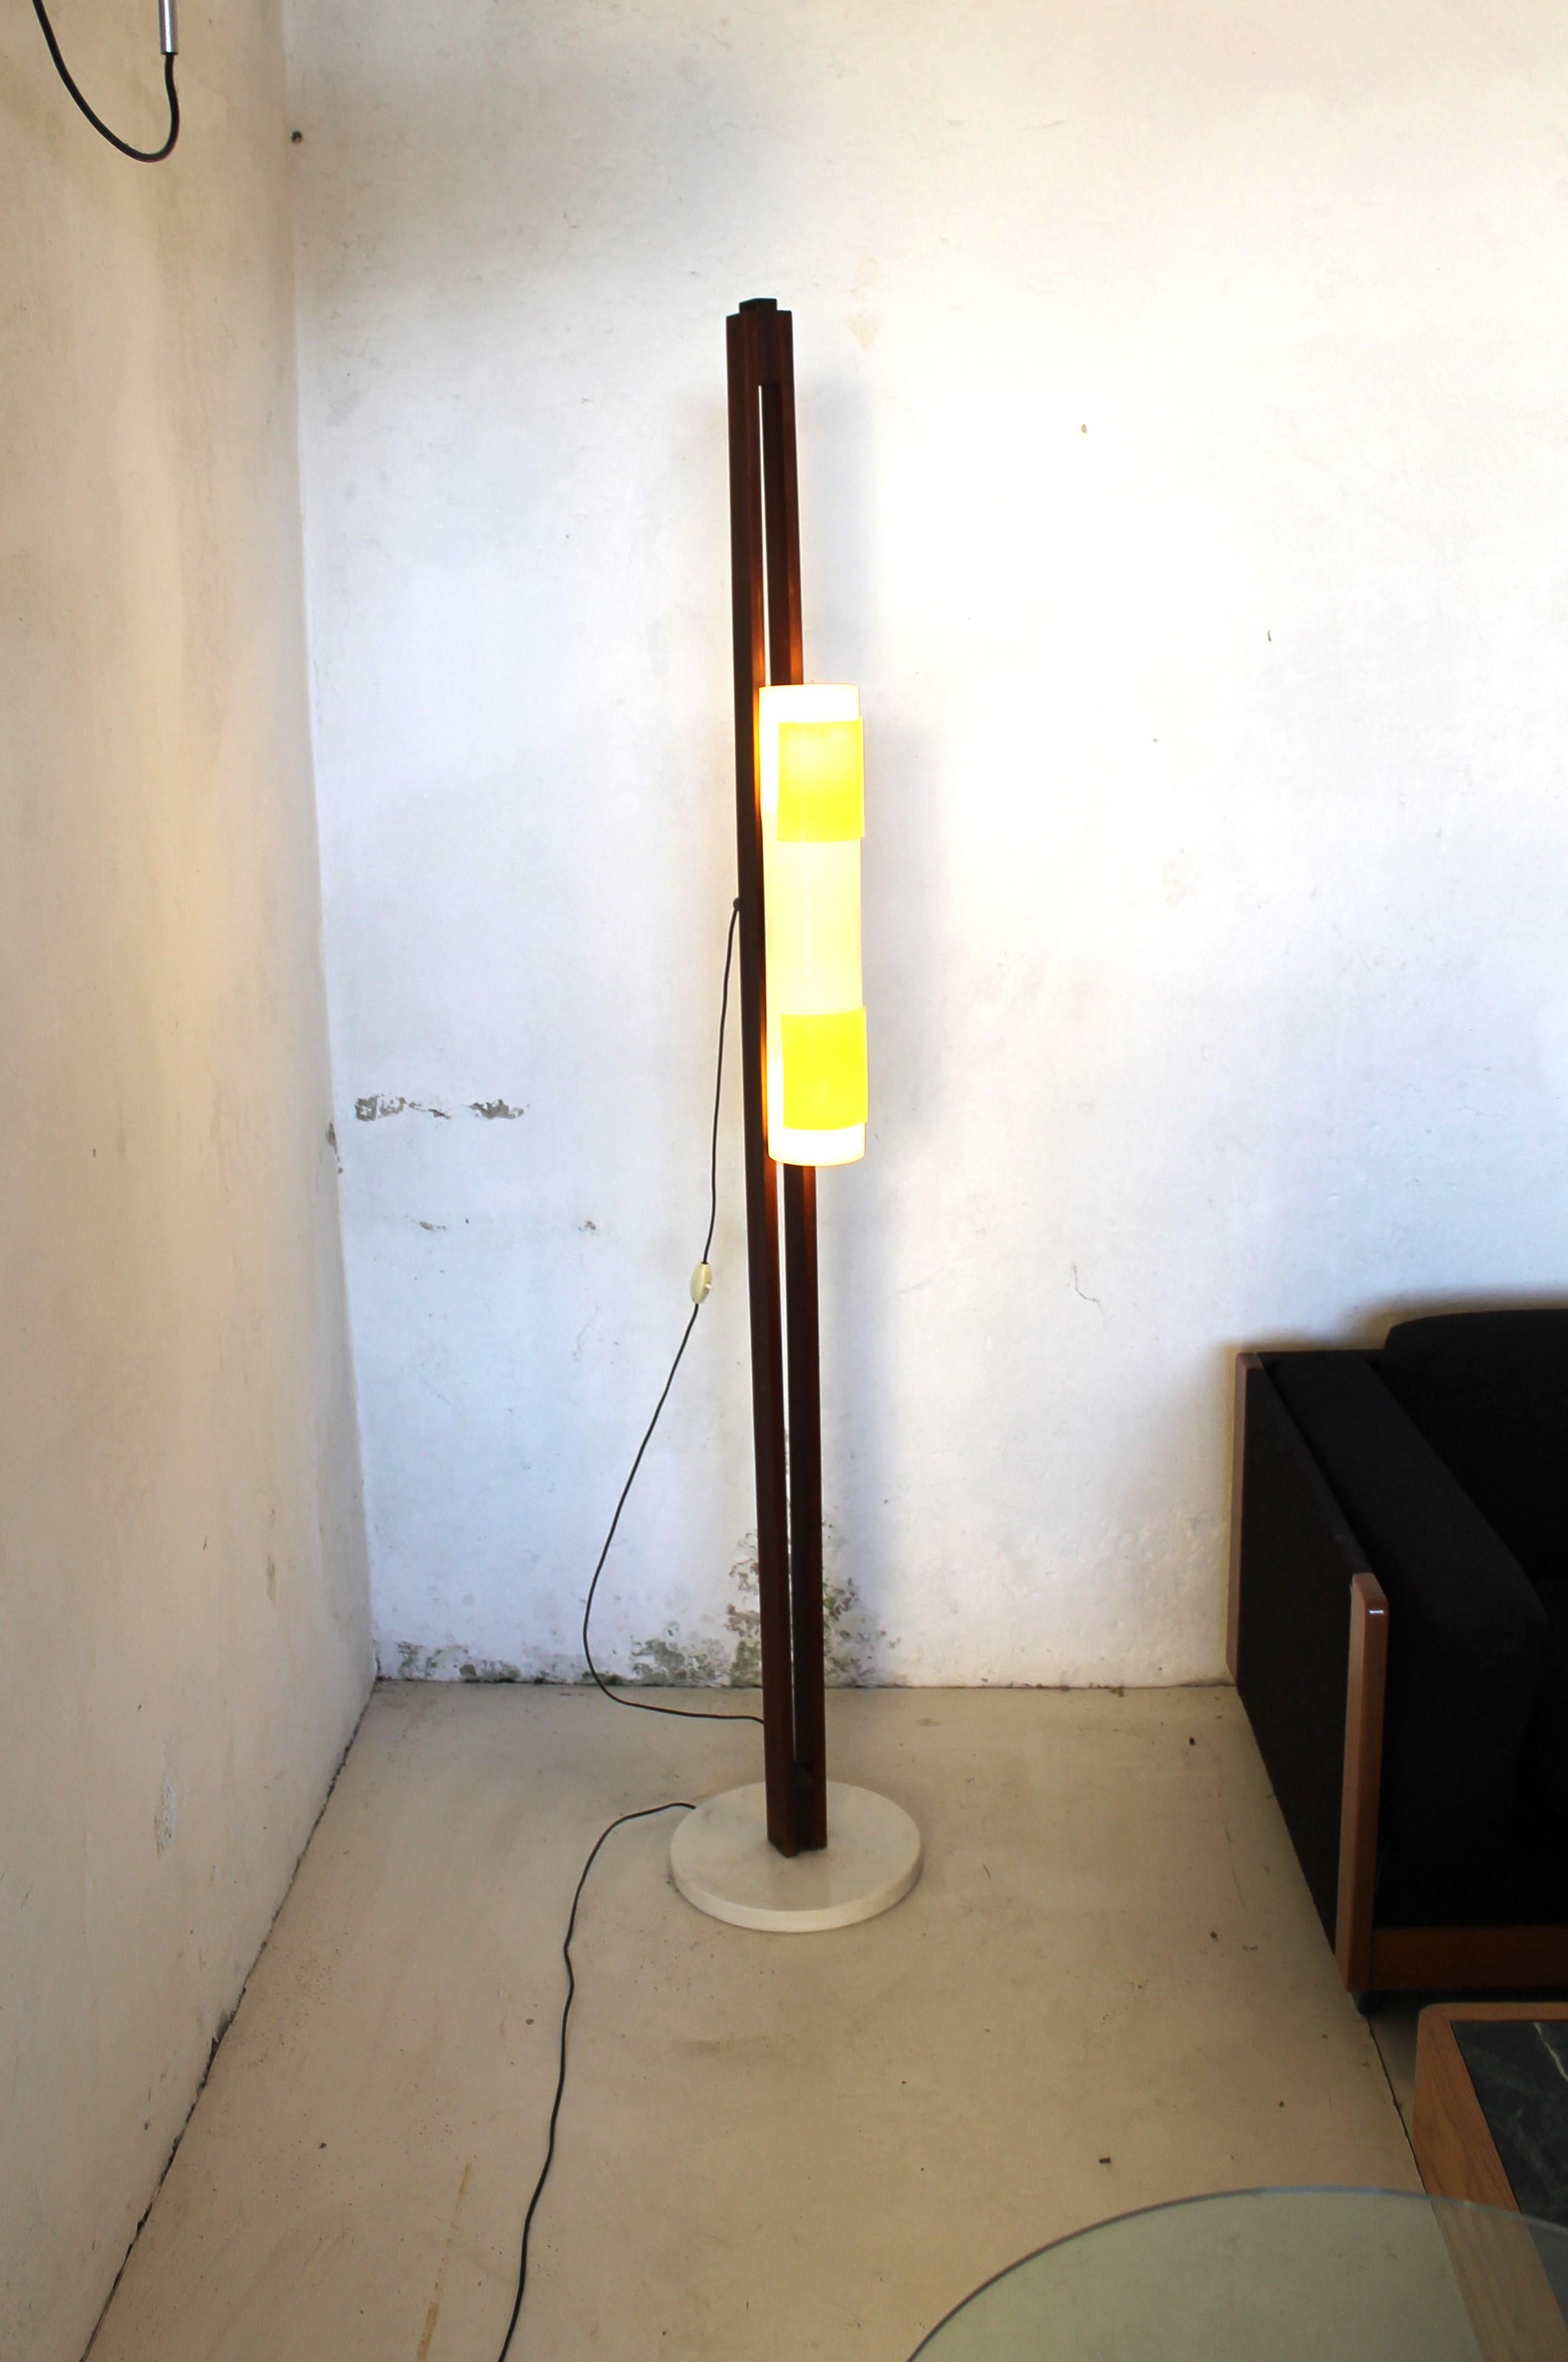 Italian Floor Lamp with white round marble base, opaline and yellow metacrylate diffuser flowing between two wooden rods.

This lamp is a fine example of the Italian production of the 60s, with references to the design of the architect Gino